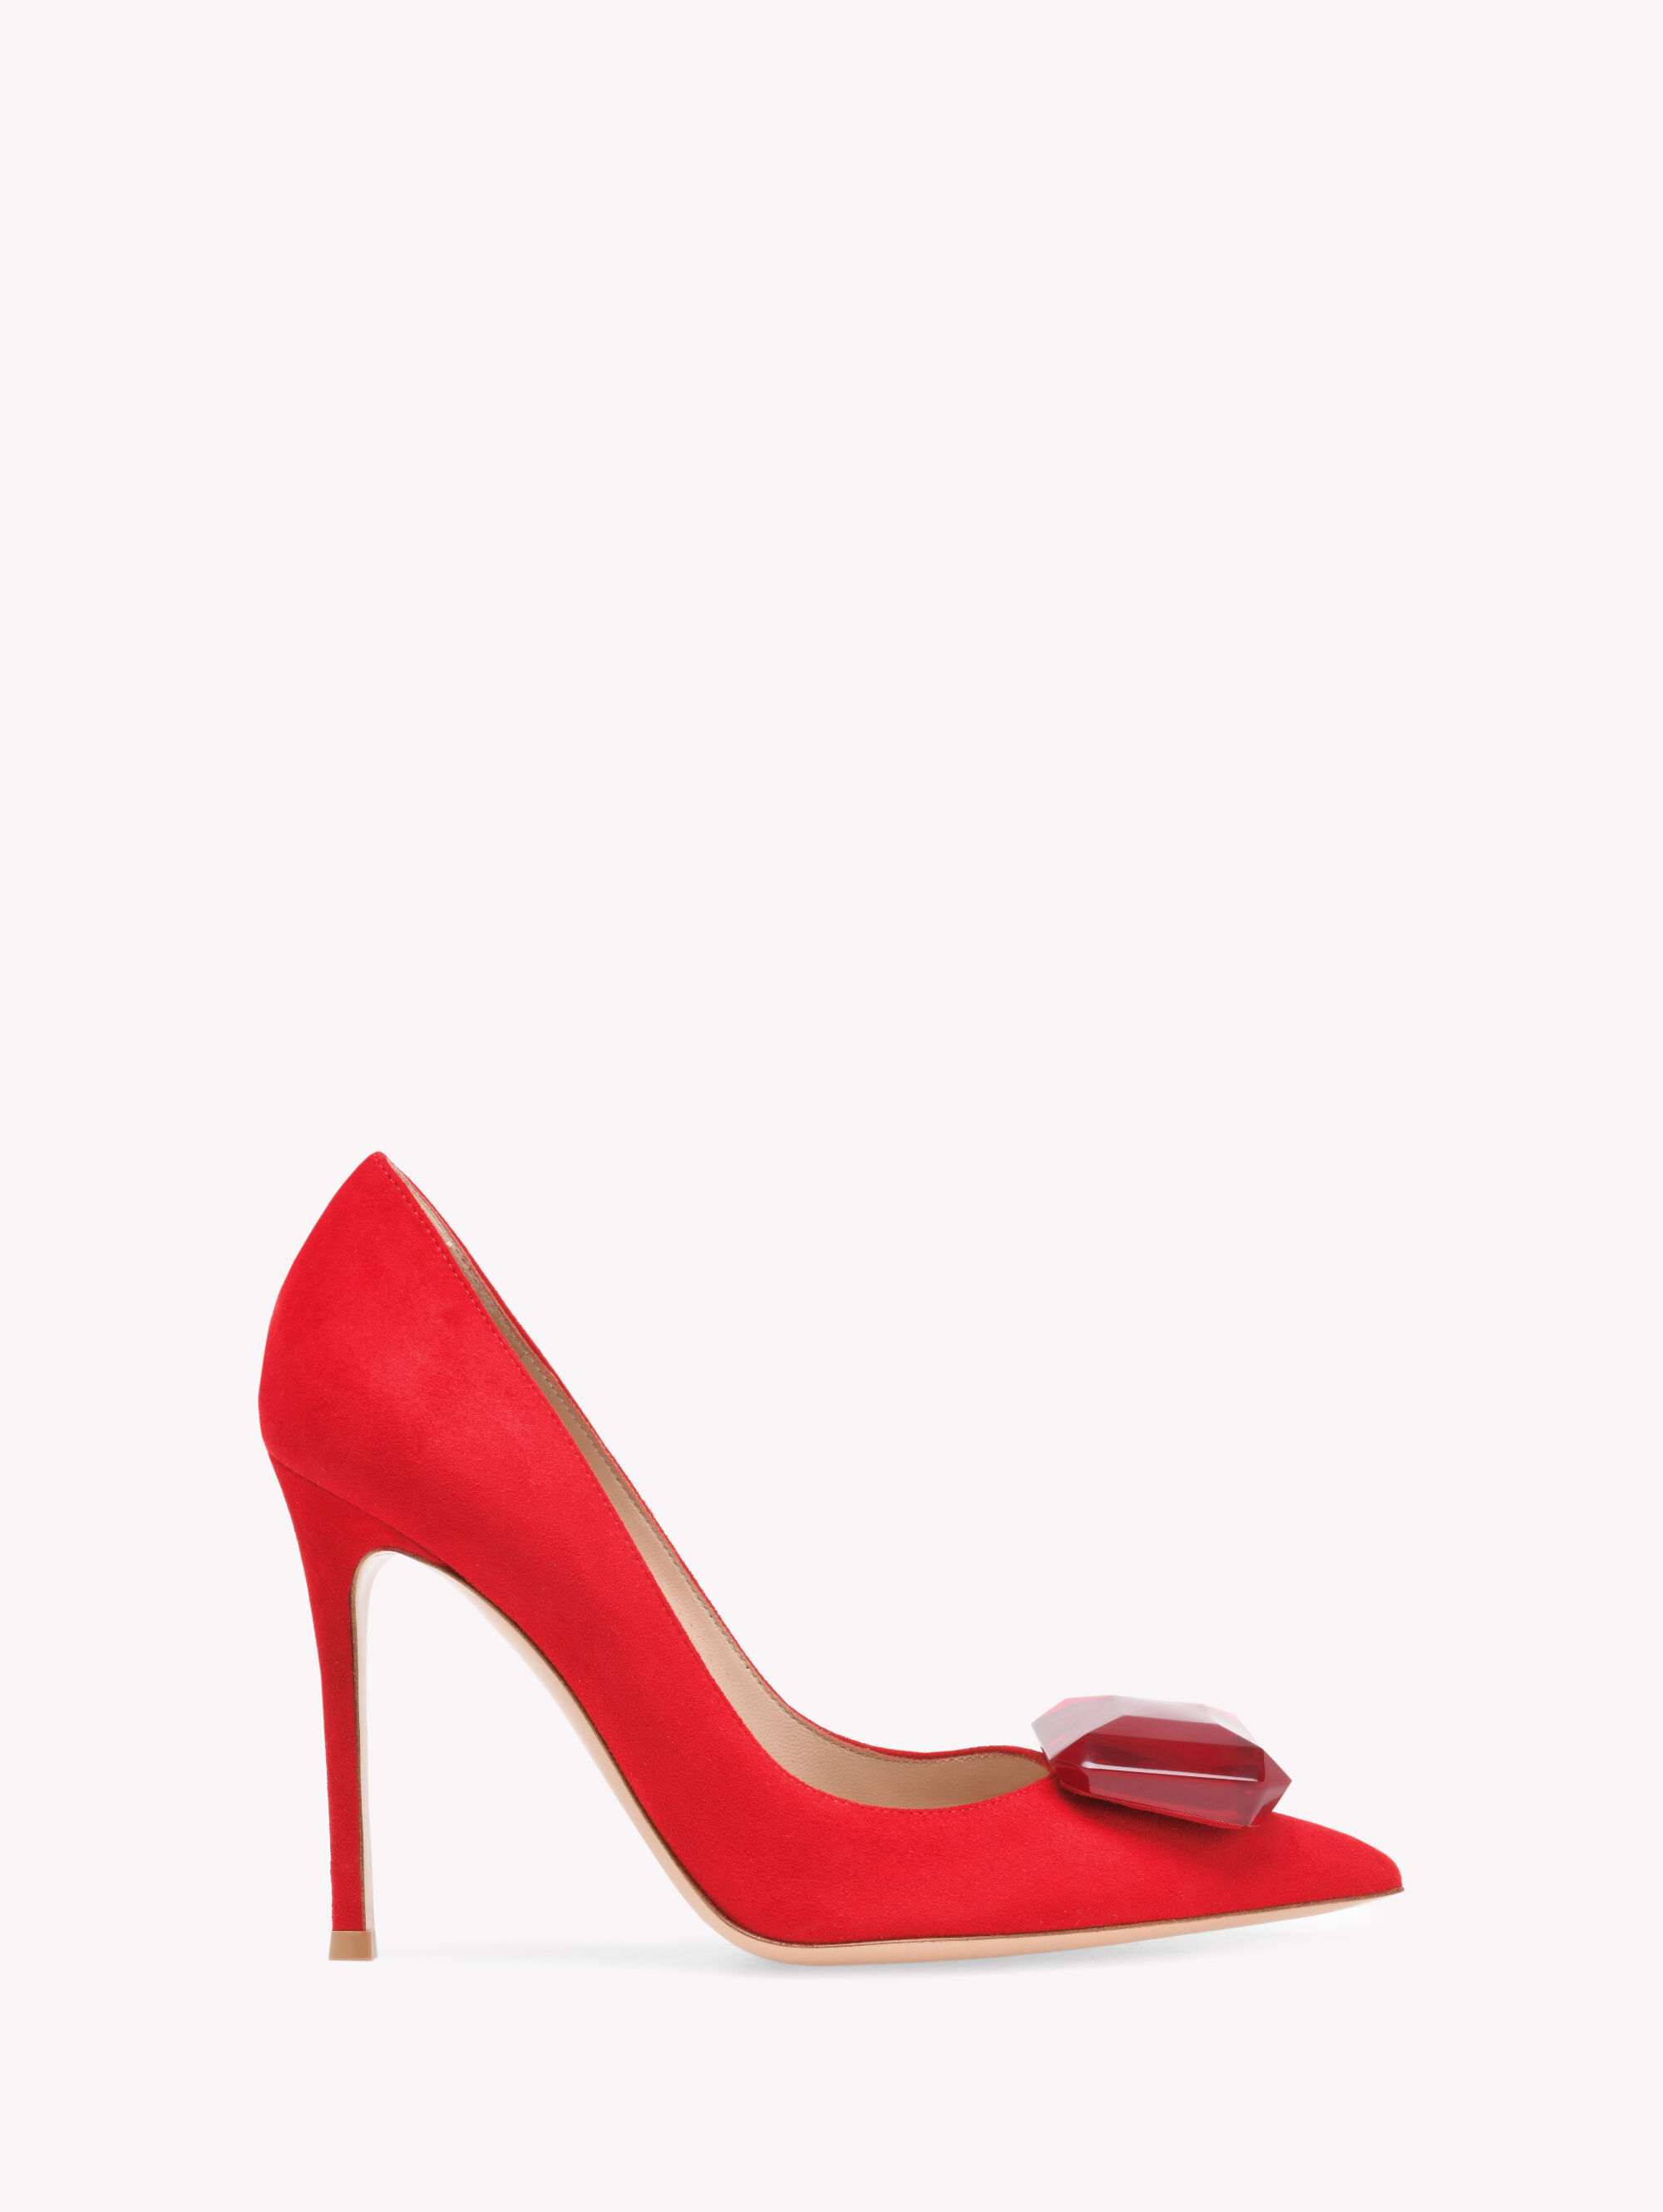 Women's New Arrivals: Luxury Shoes and Bags | Gianvito Rossi